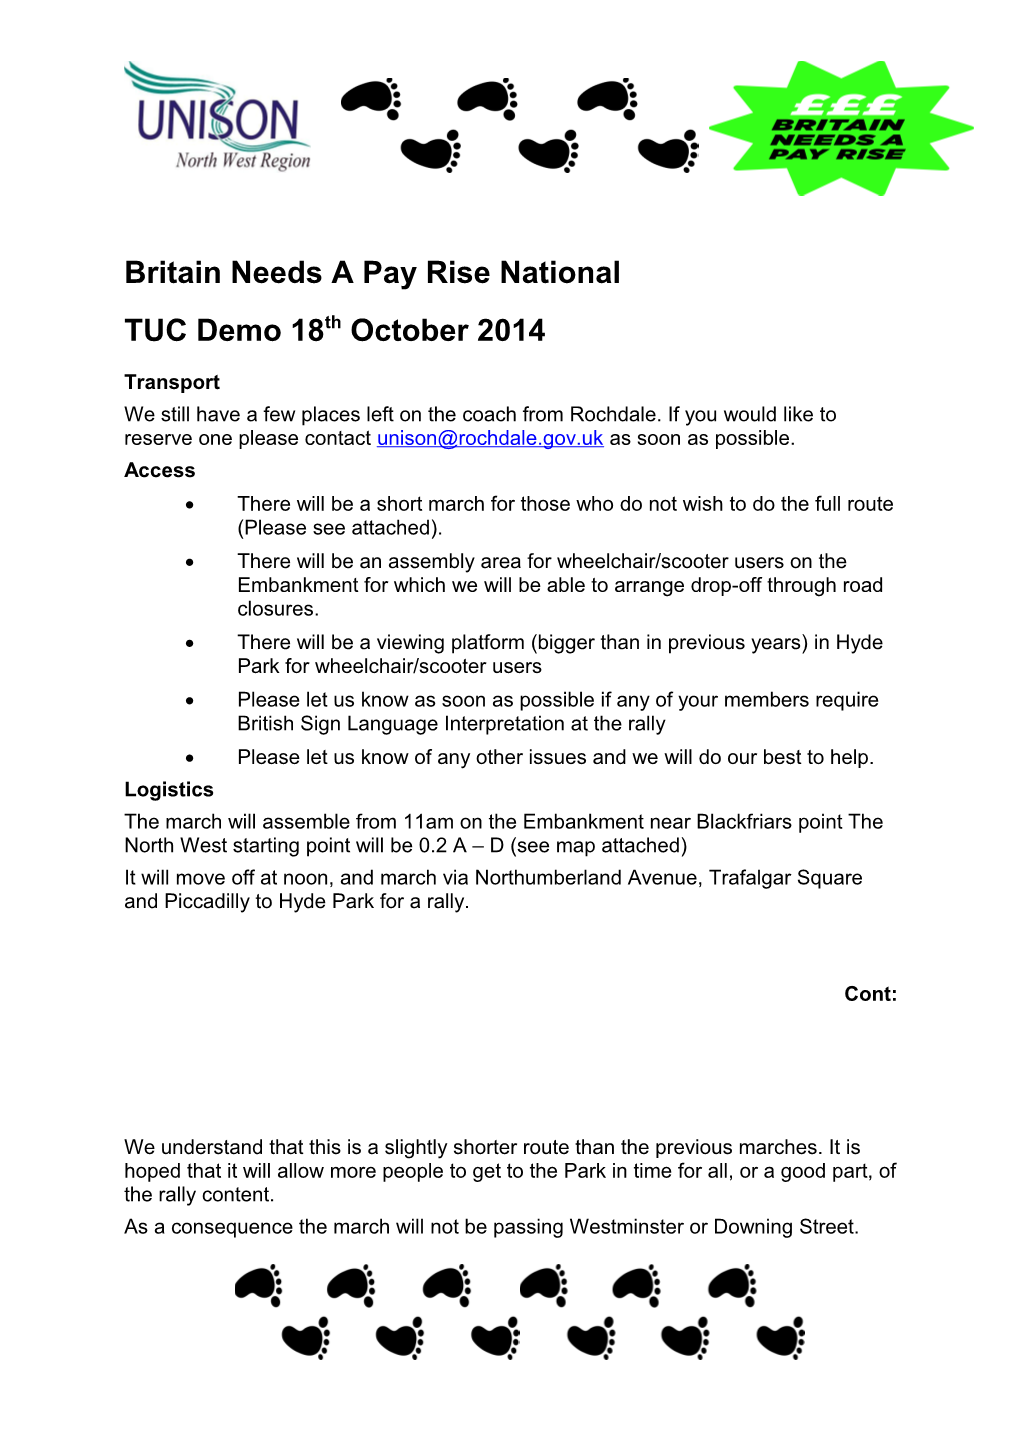 Britain Needs a Pay Rise Briefing No4